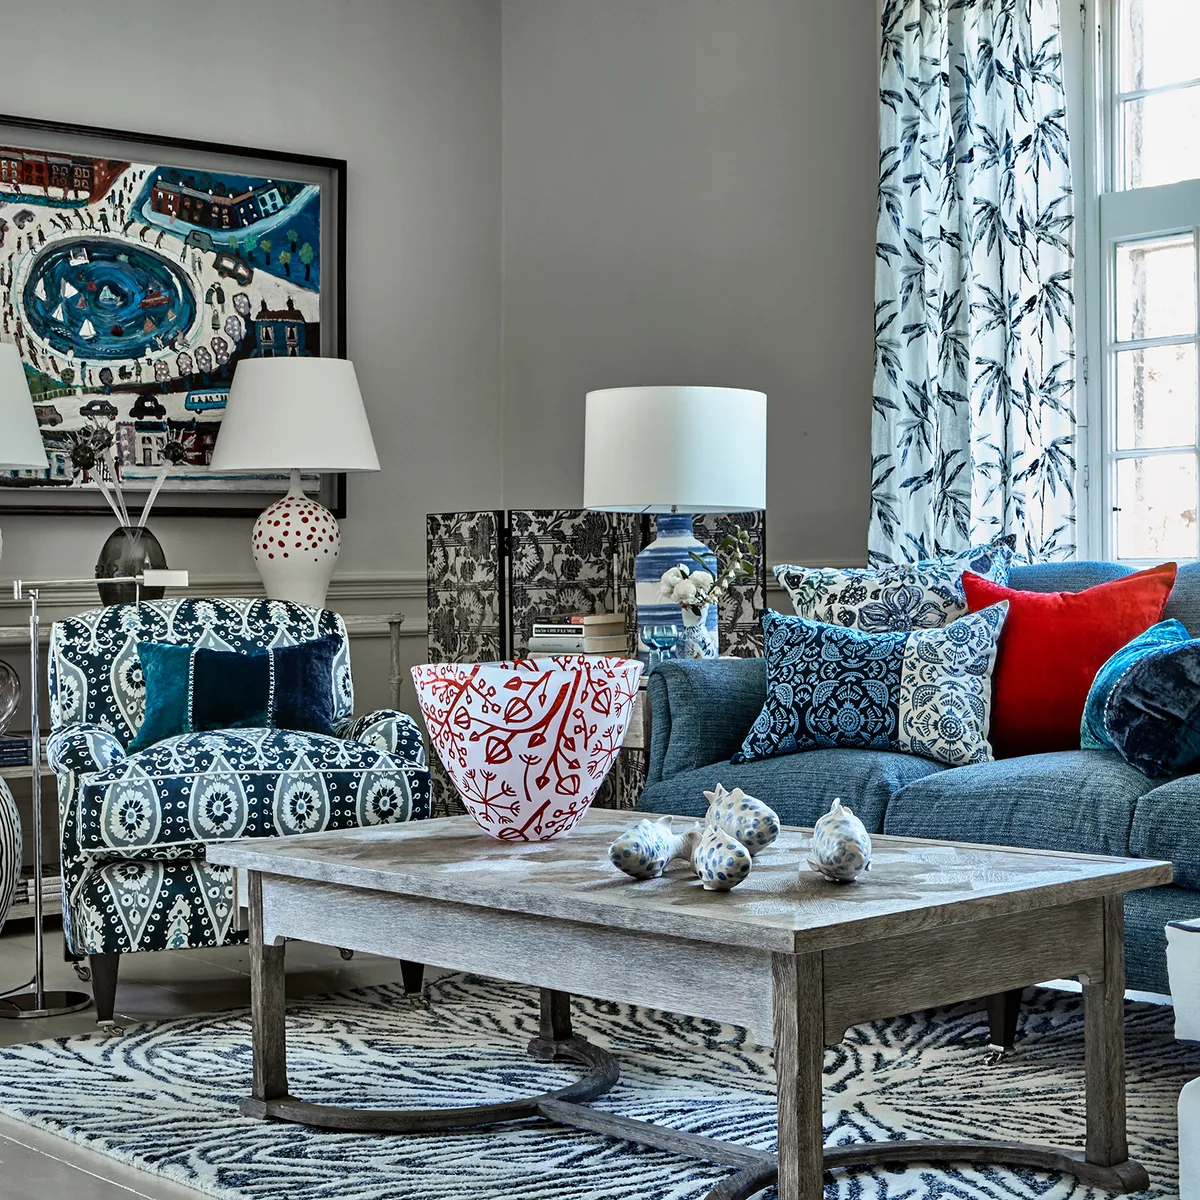 To give nautical blues a comfy cottage twist, clash blue patterned fabrics and add splashes of red. Image by Amara